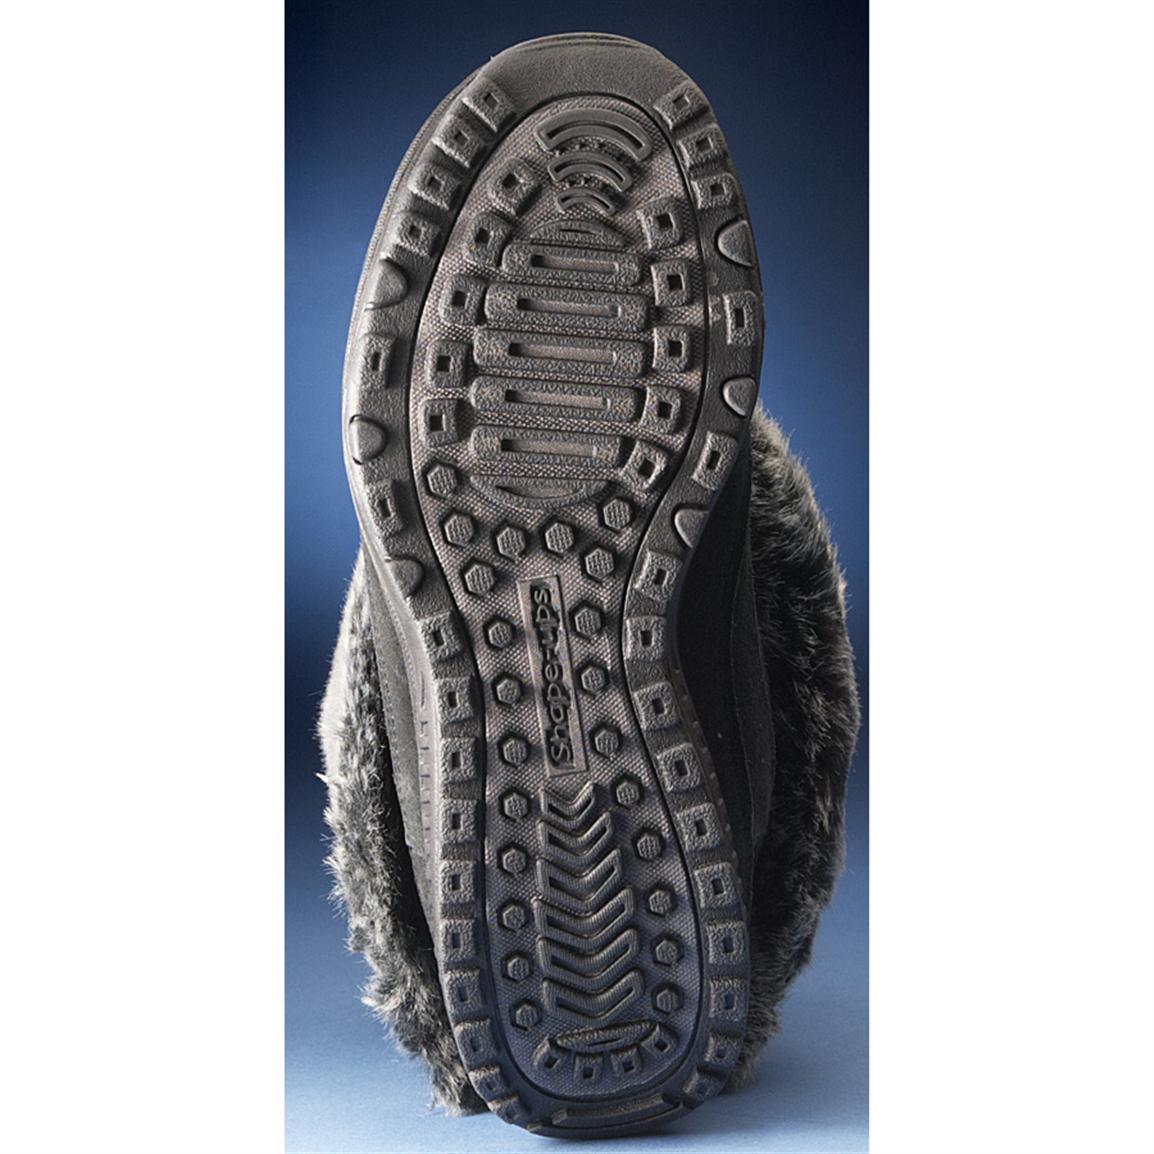 Women S Skechers® Shape Ups® Bright Eyed Boots 212084 Winter And Snow Boots At Sportsman S Guide